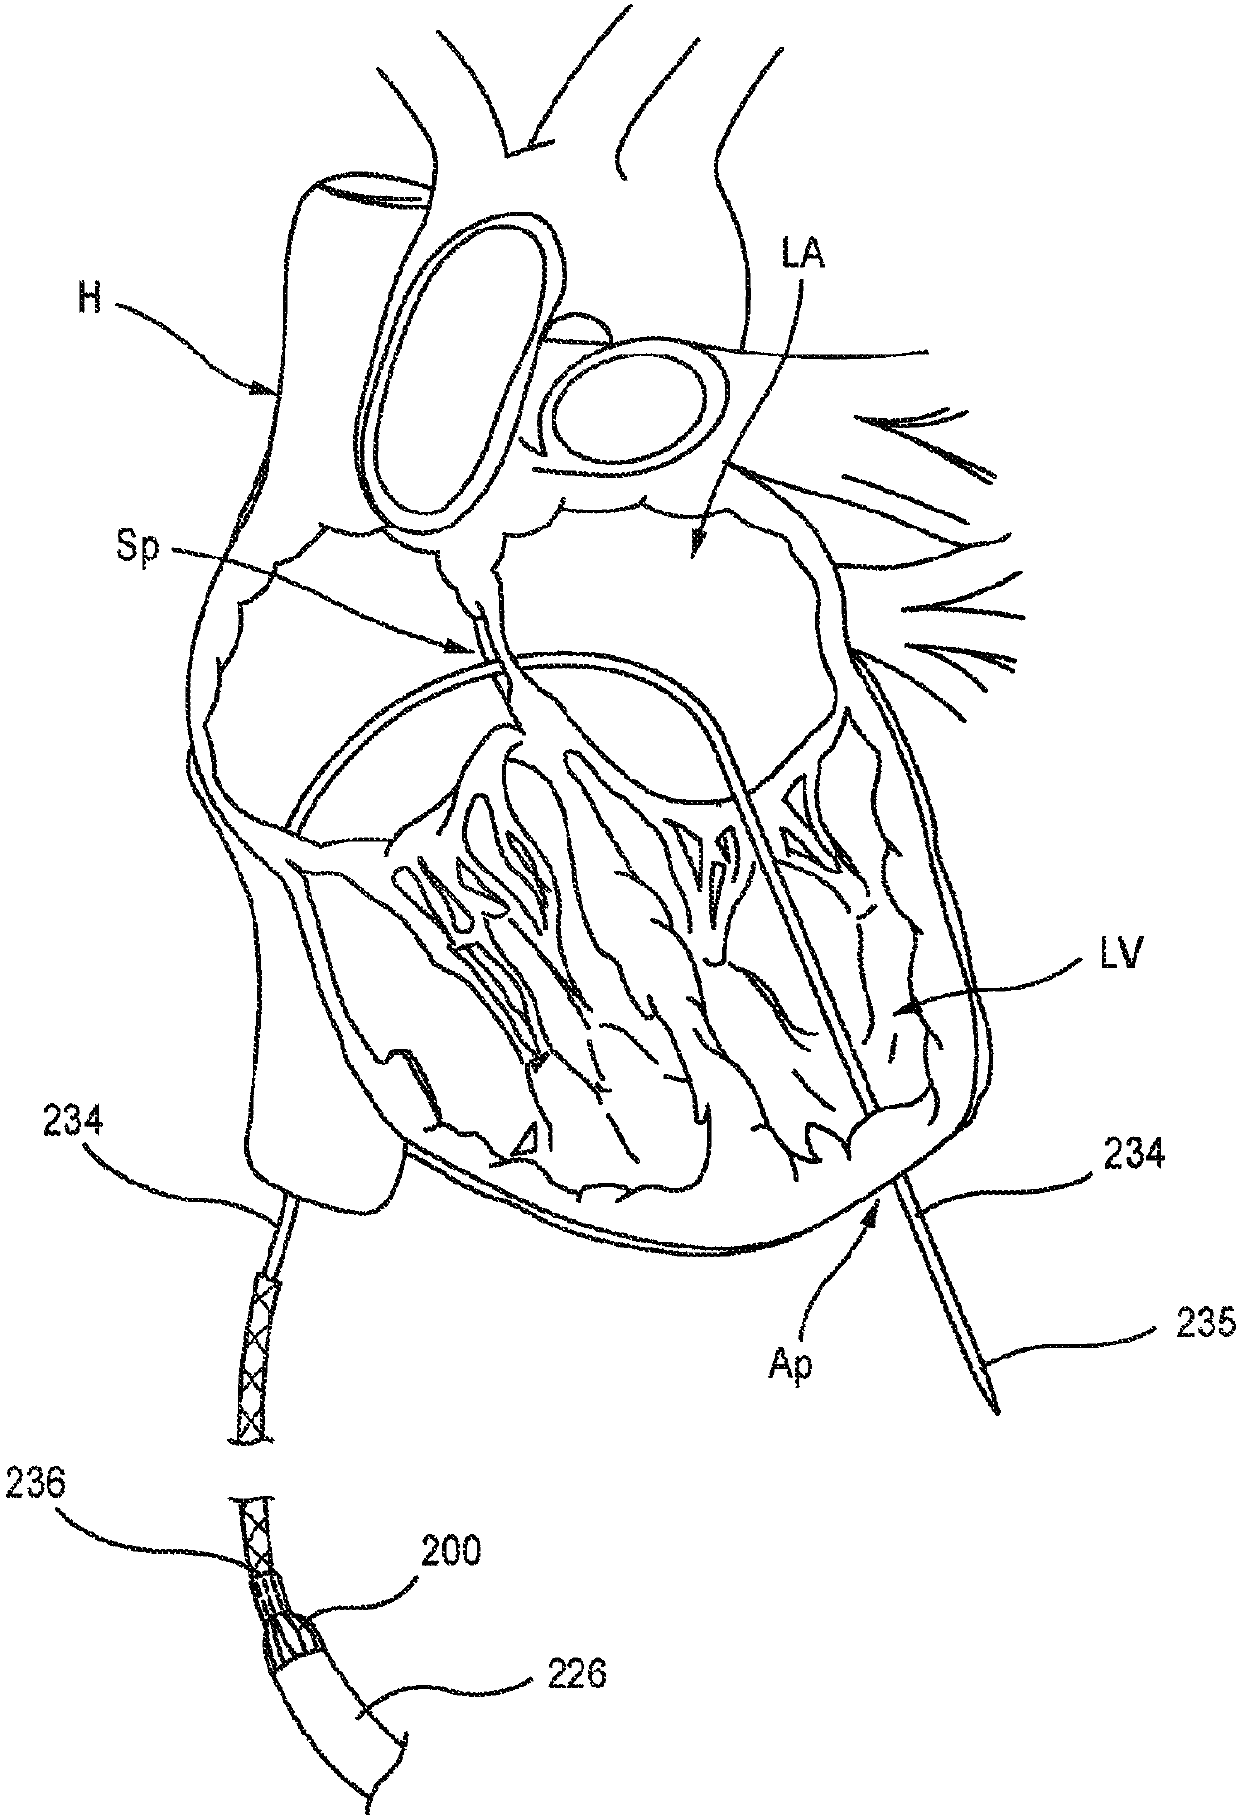 Apical control of transvascular delivery of prosthetic mitral valve